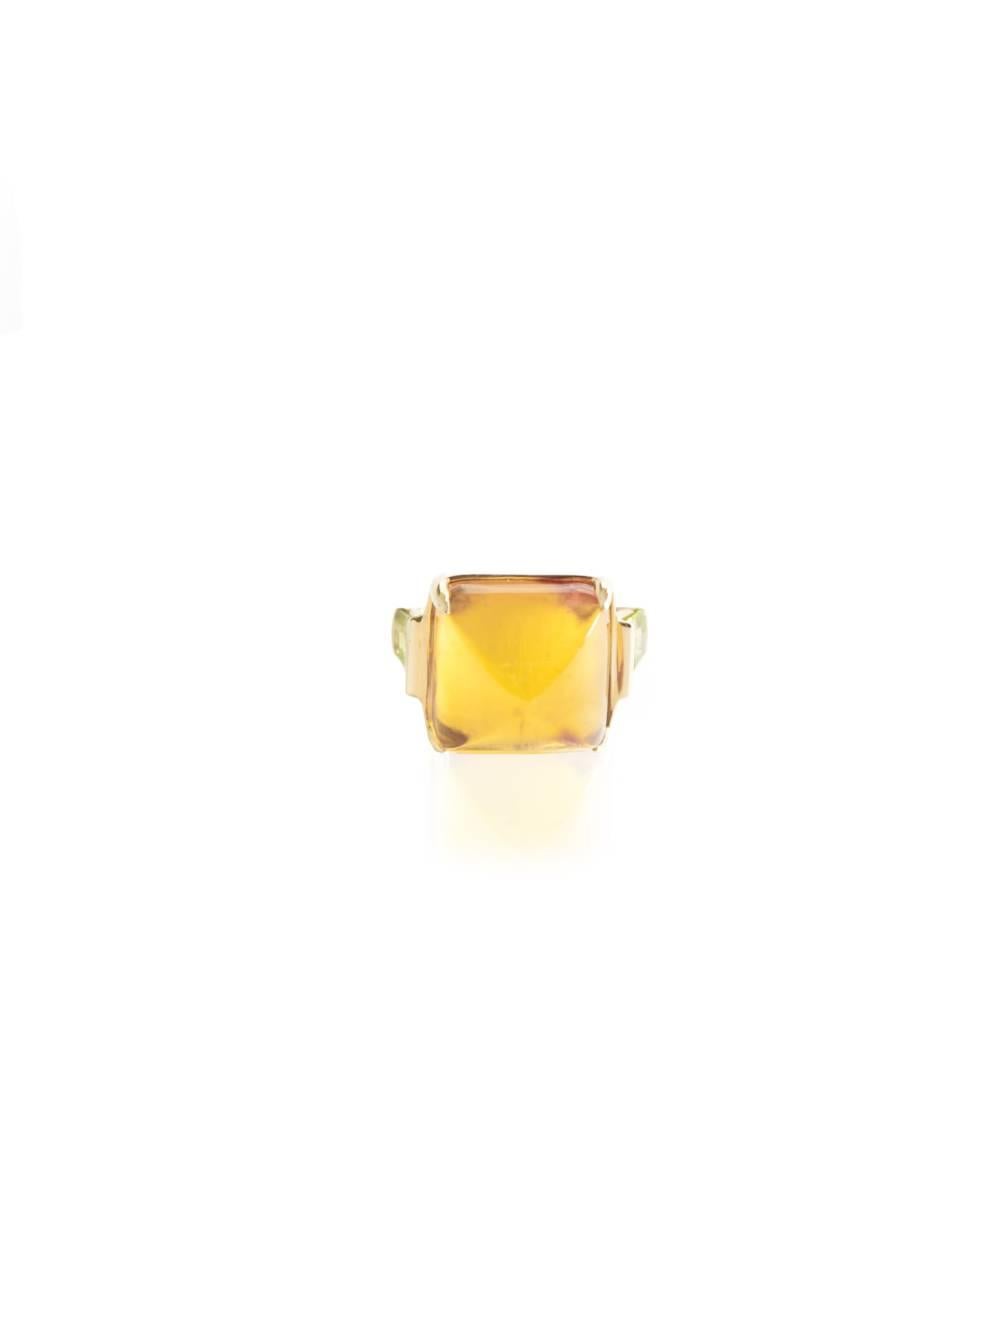 18kt. Yellow gold ring with amber and peridot.

Handmade in Italy

Made-to-order production time: 4 weeks 